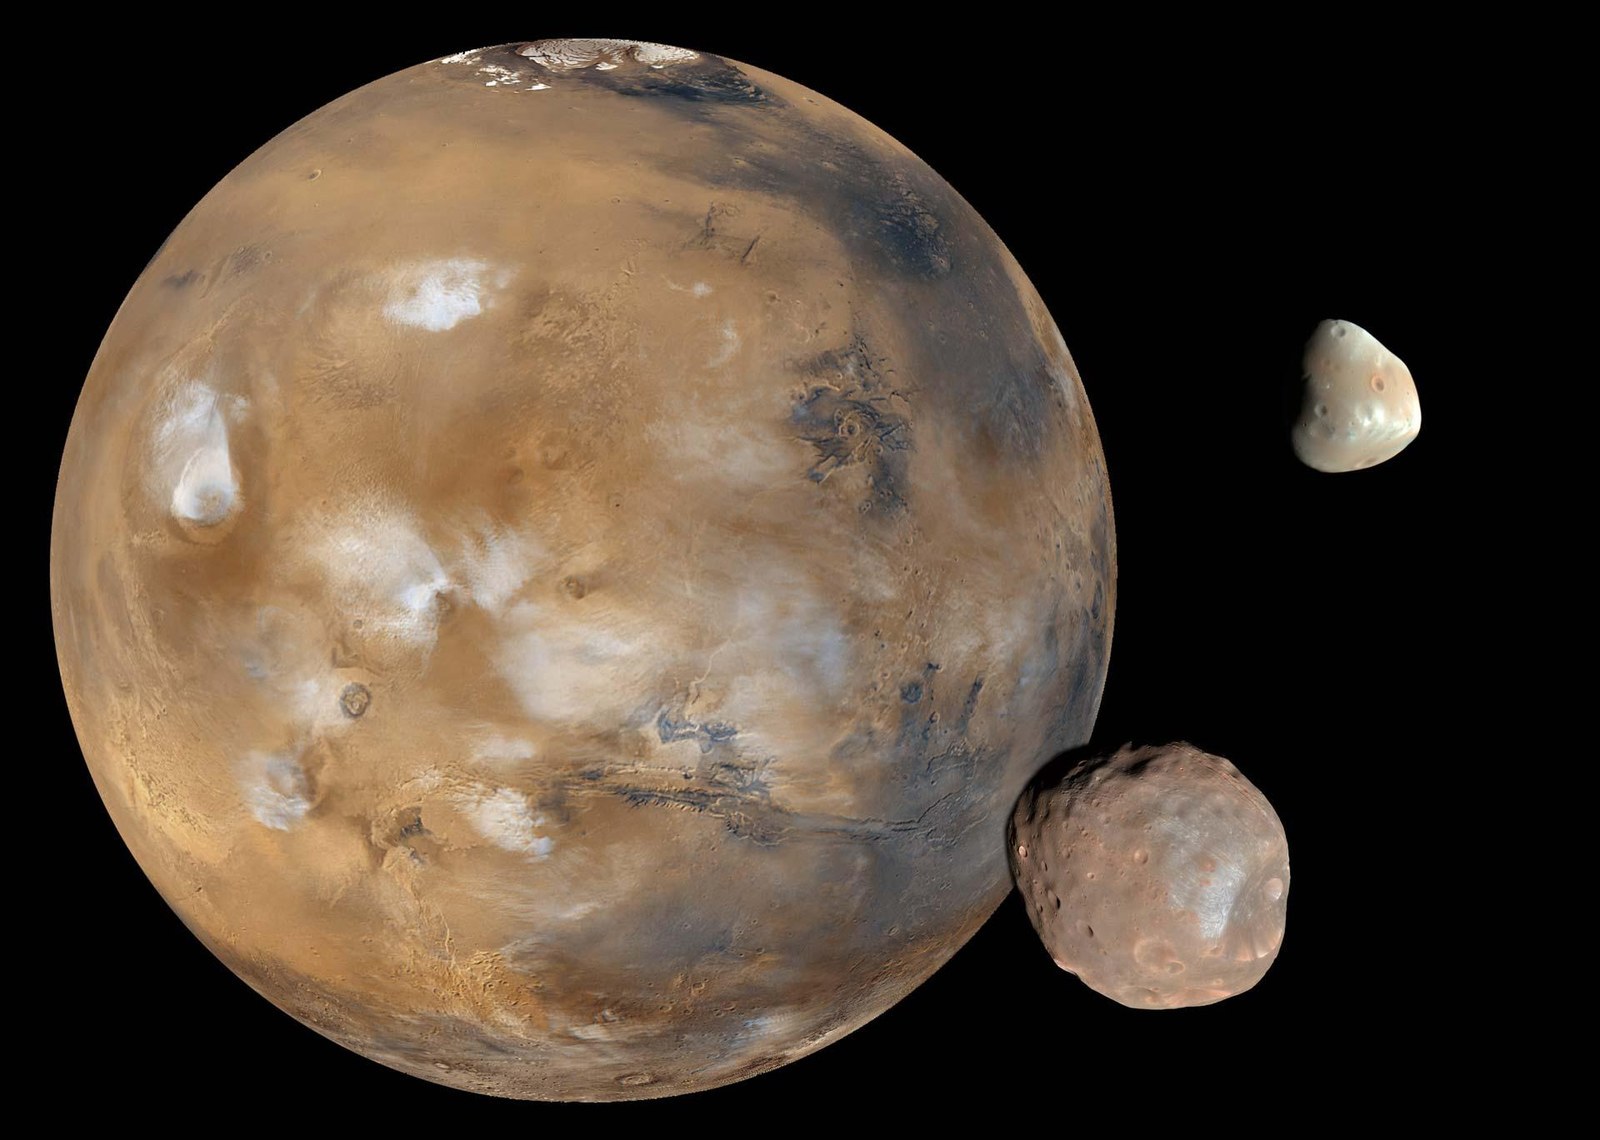 Mars with its moons Deimos (above) and Phobos